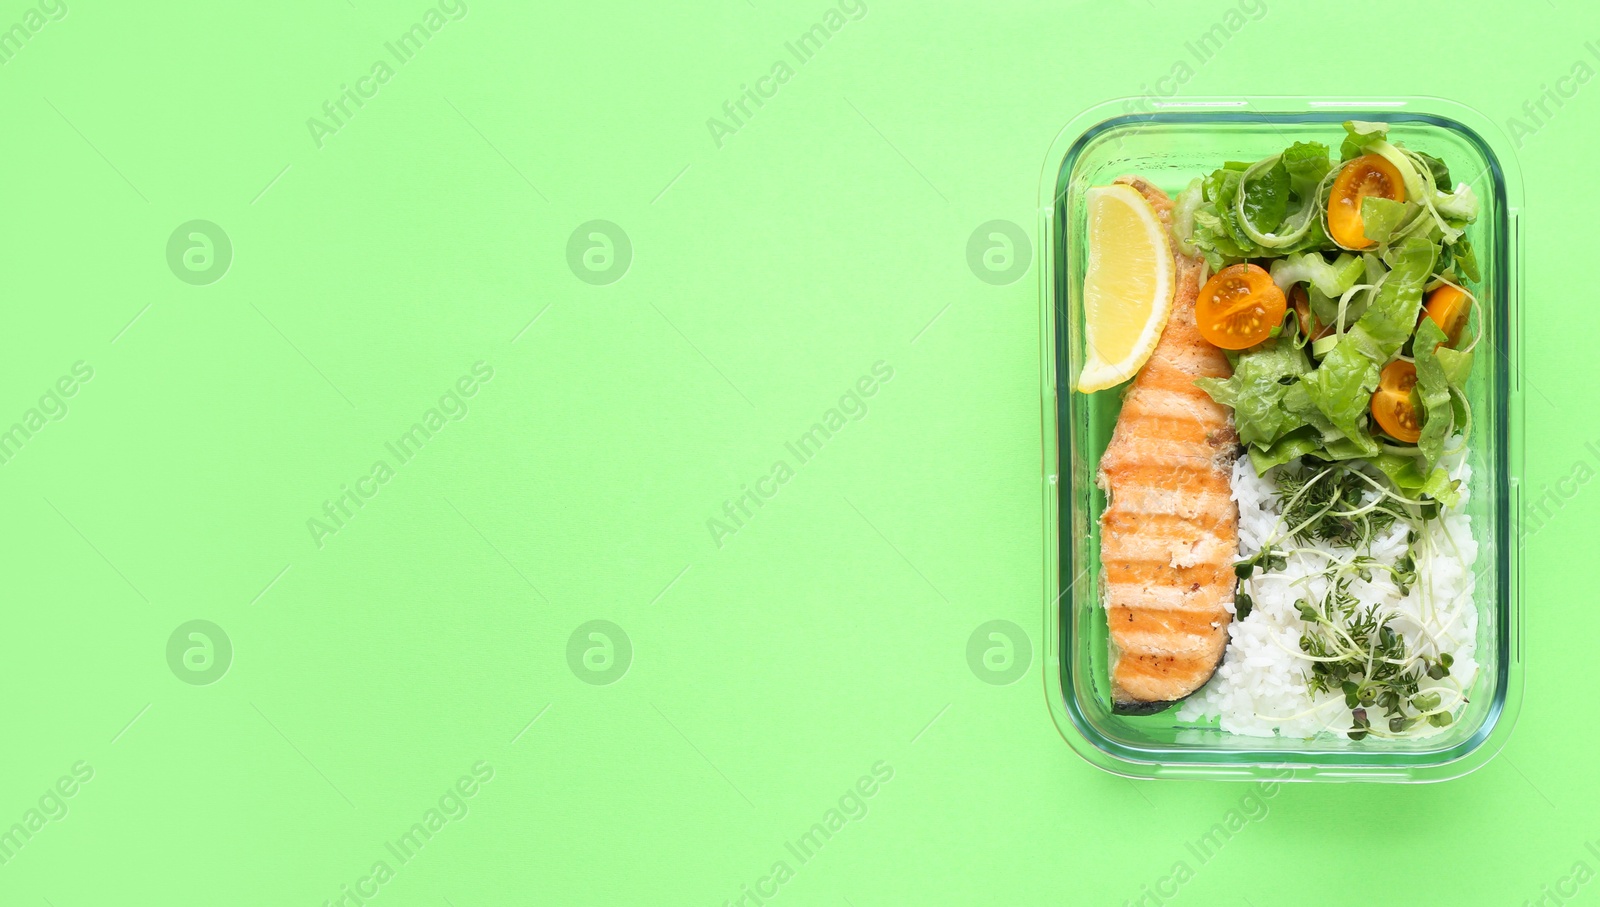 Photo of Healthy meal. Fresh salad, salmon and rice in glass container on green background, top view. Space for text